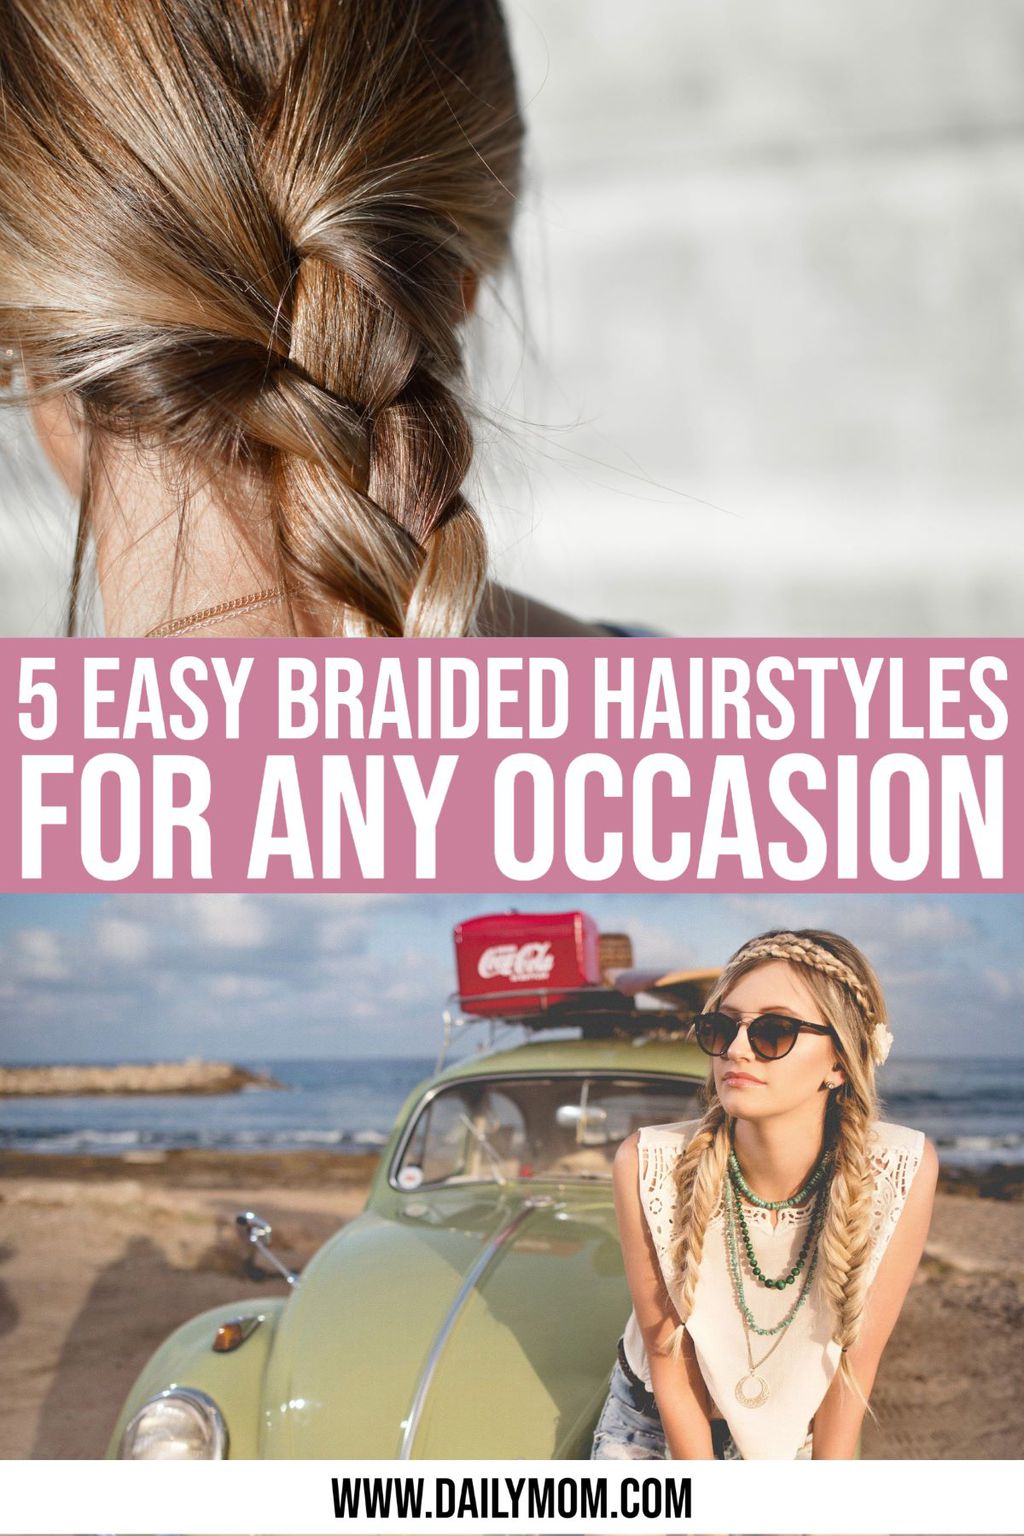 Easy Braided Hairstyles: 5 Ways To Switch Up Your Look